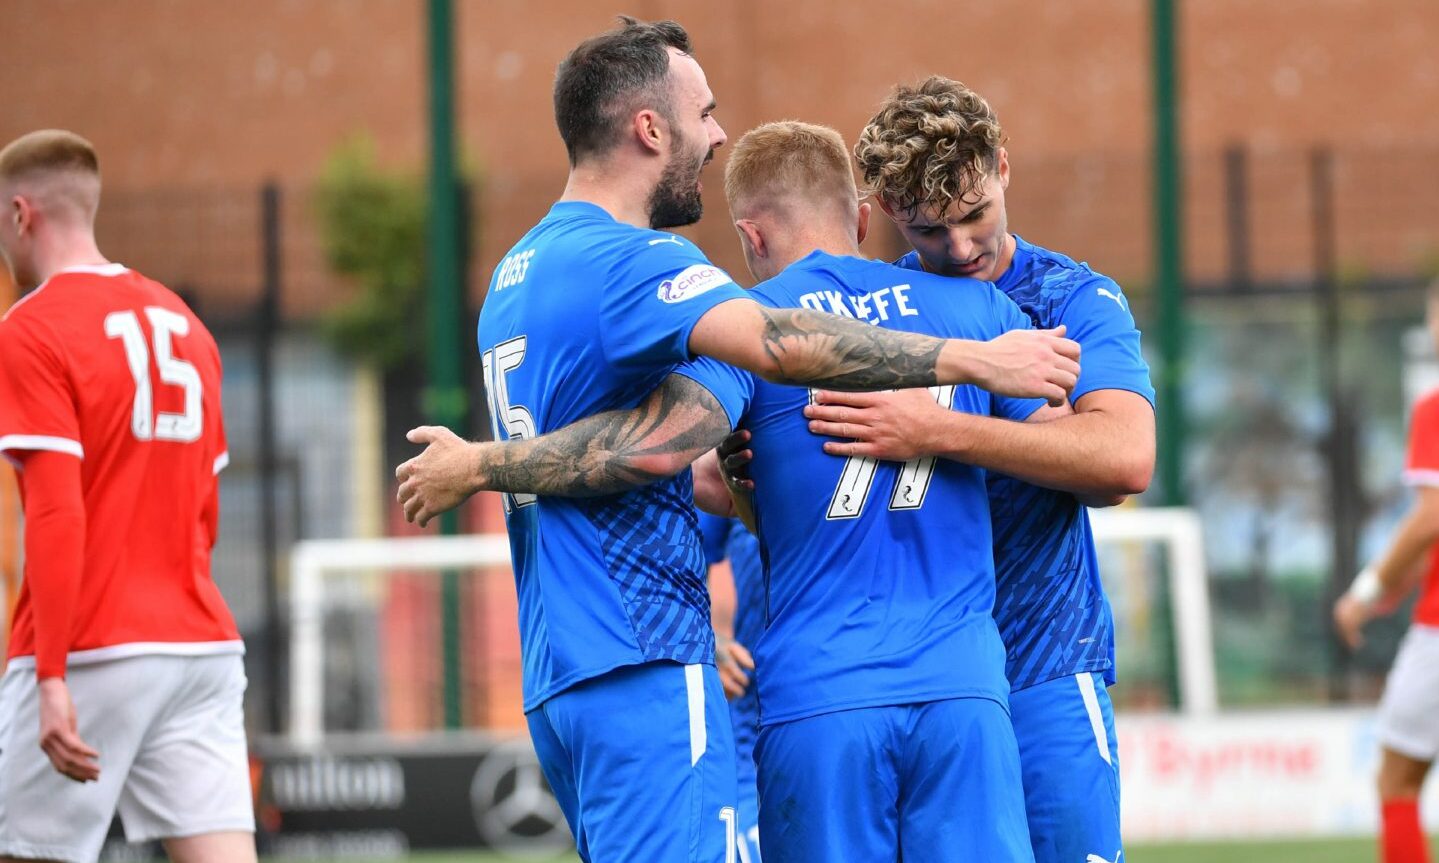 Clyde 1-2 Peterhead: Blue Toon move two points clear at the top of the table